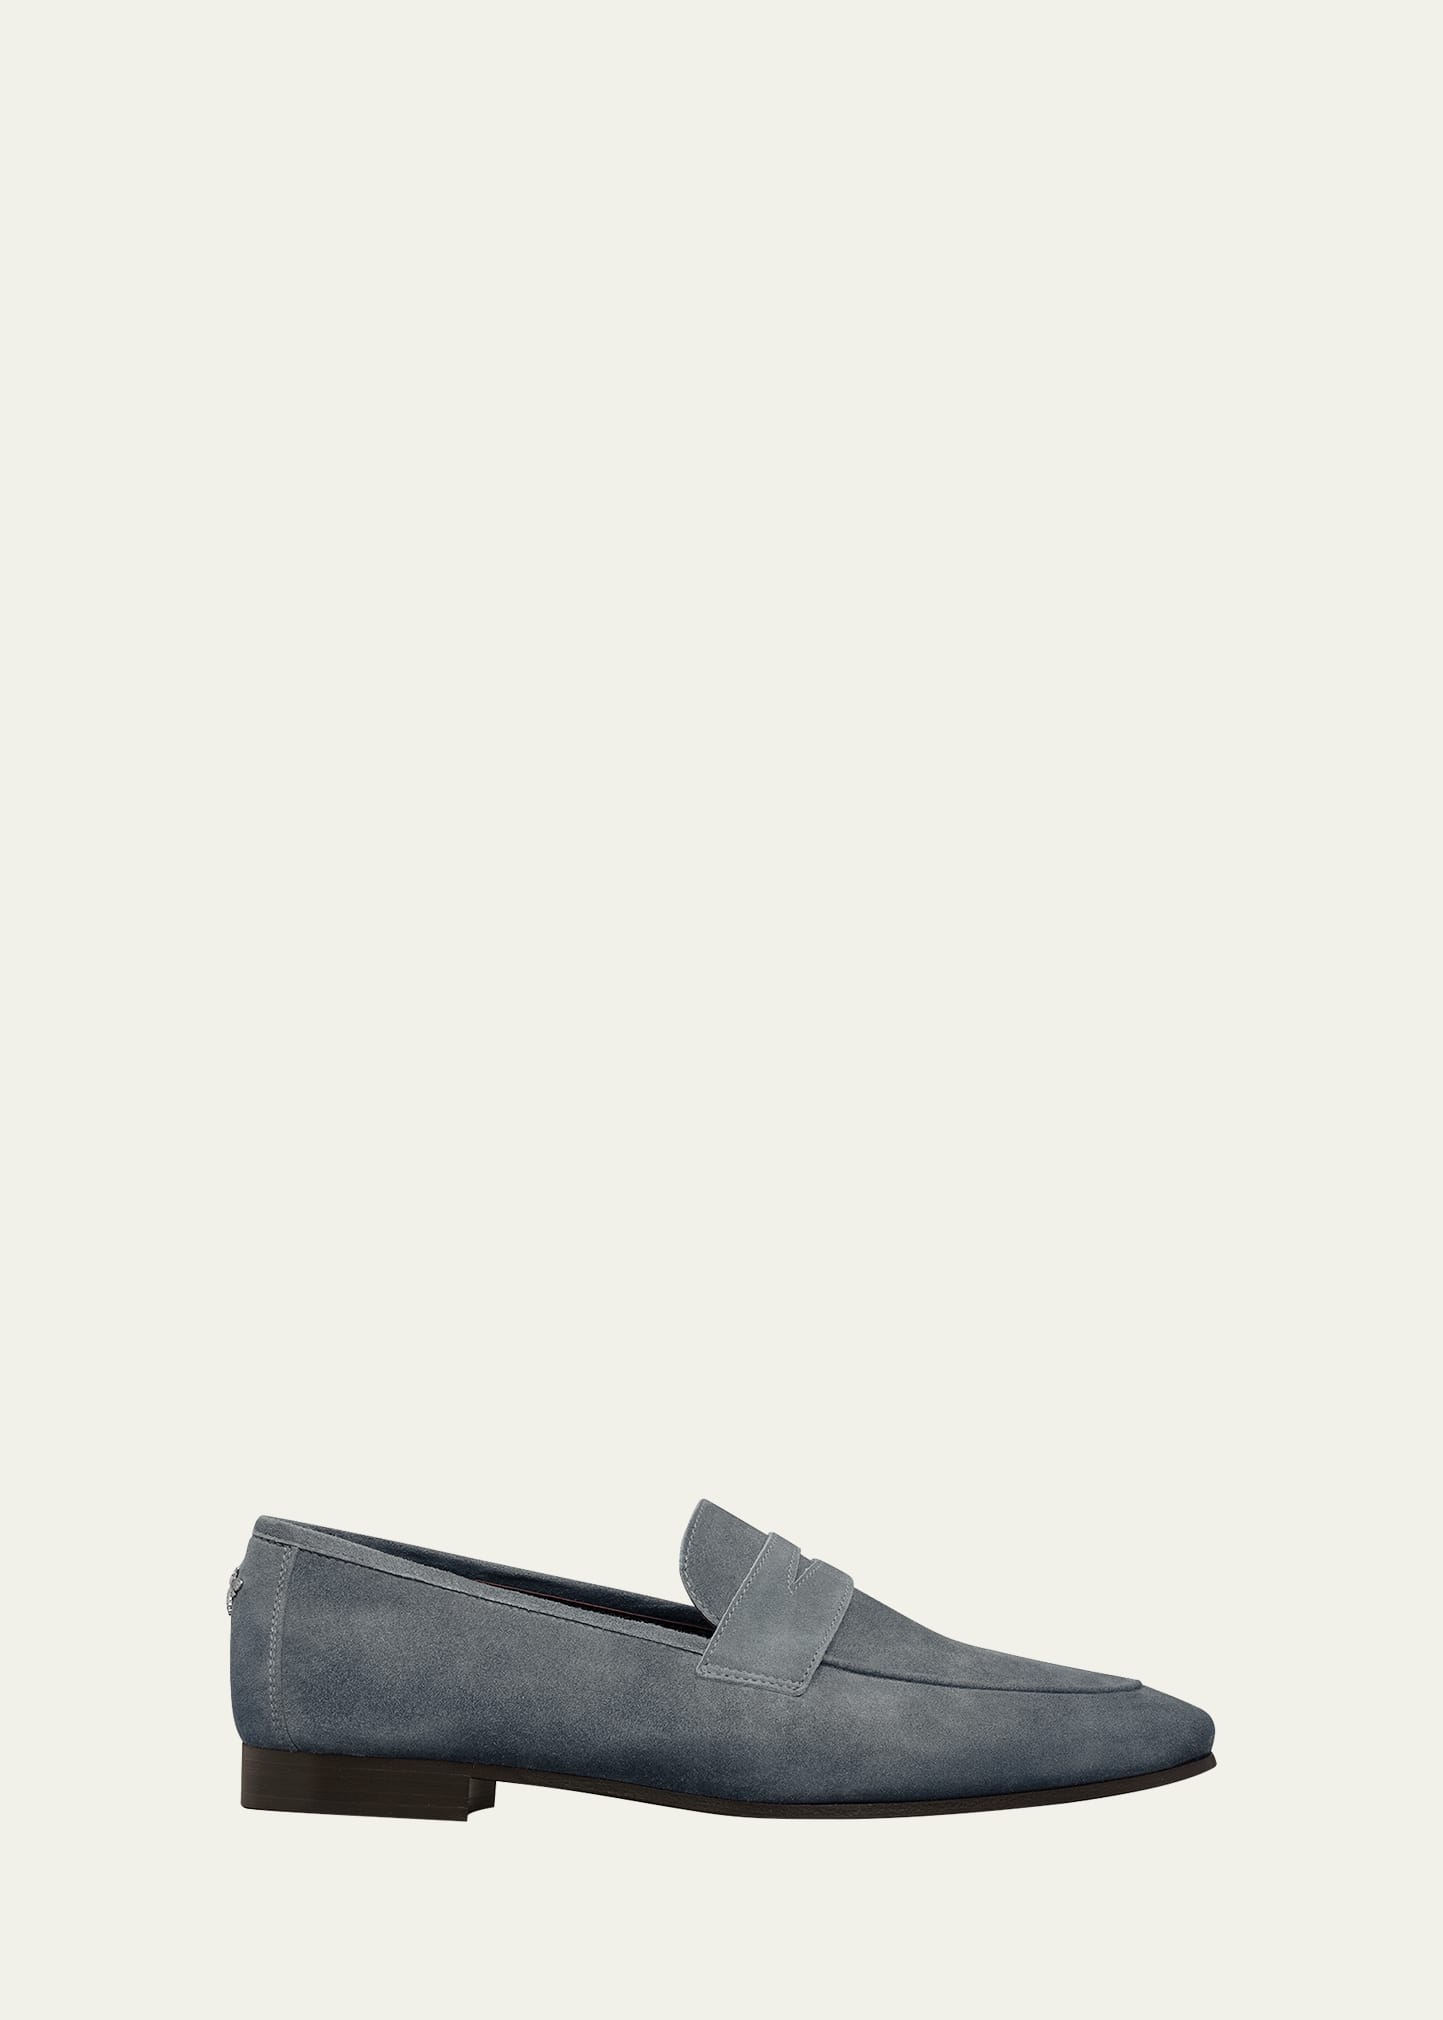 Bougeotte Flaneur Suede Penny Loafers